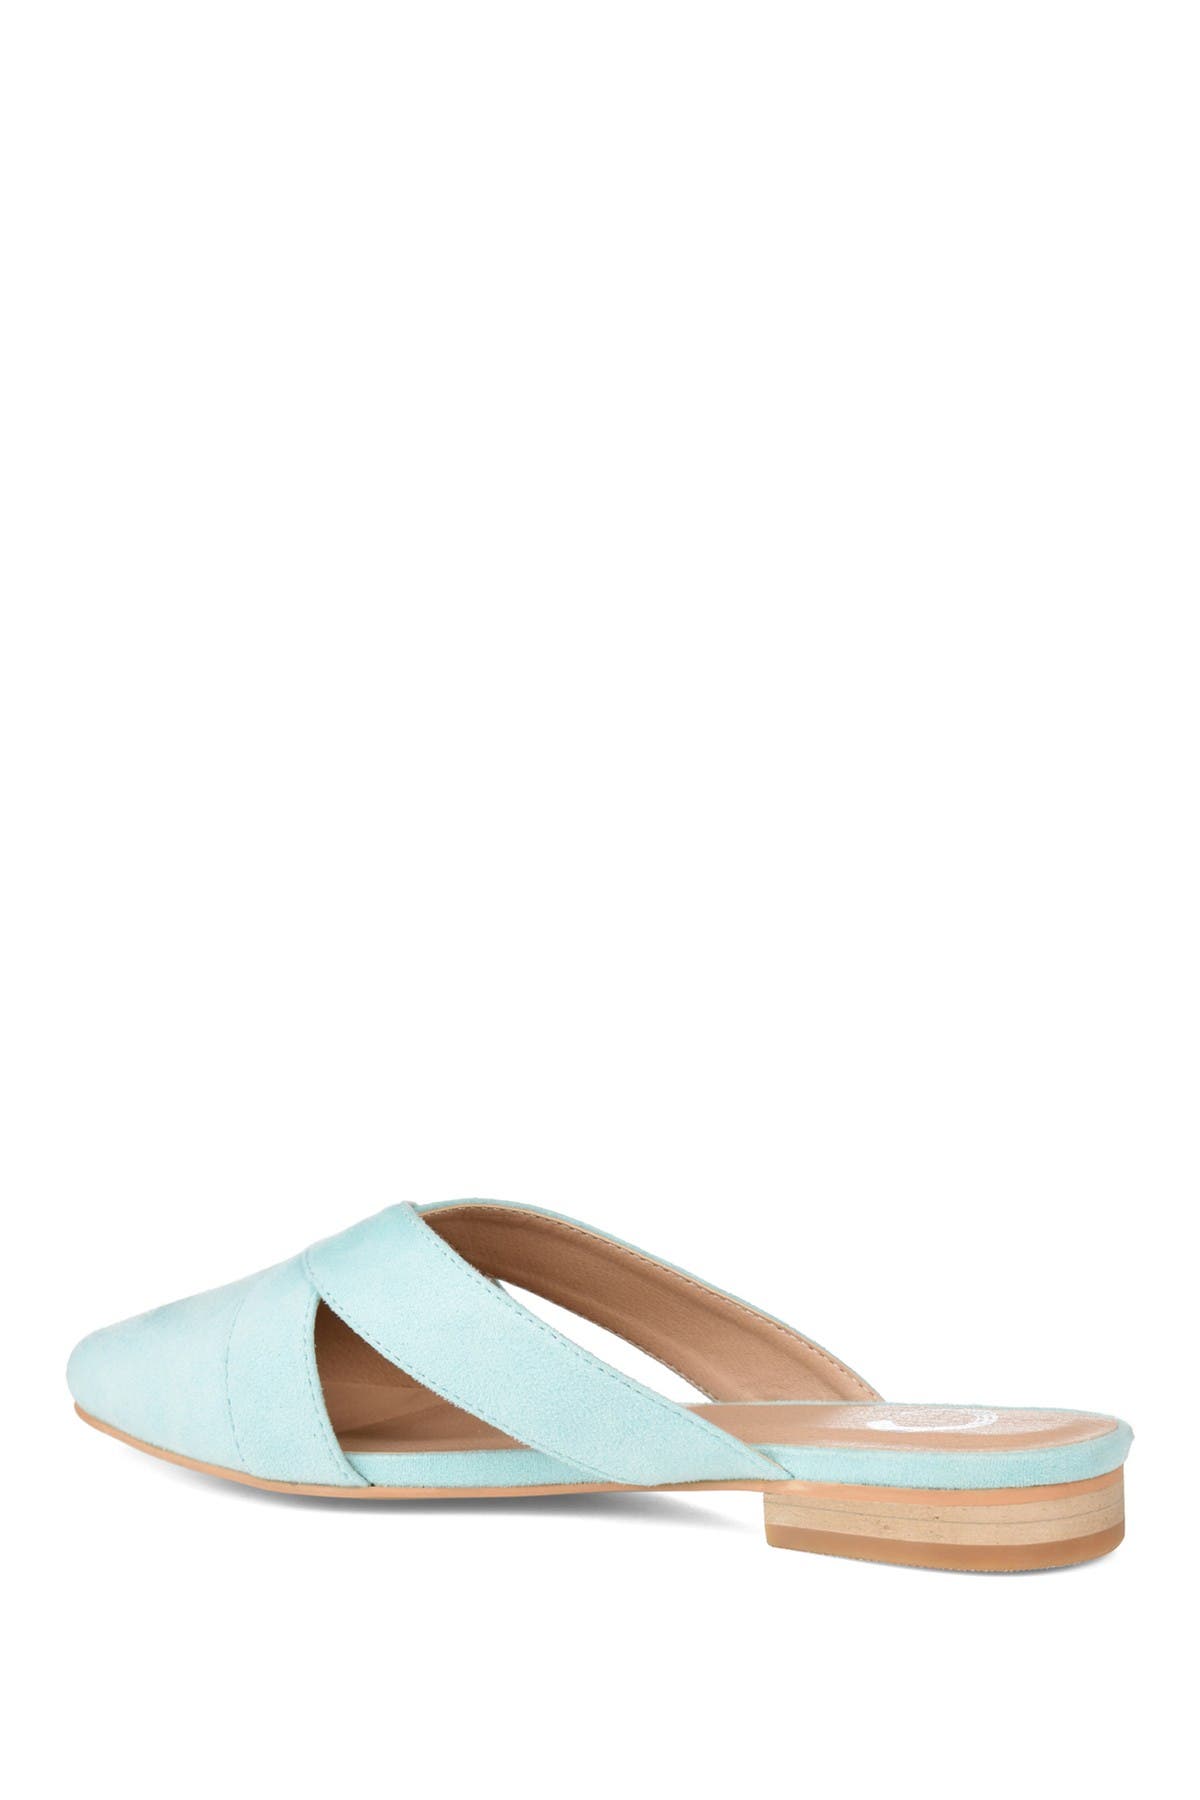 Journee Collection Giada Mule In Light/pastel Green